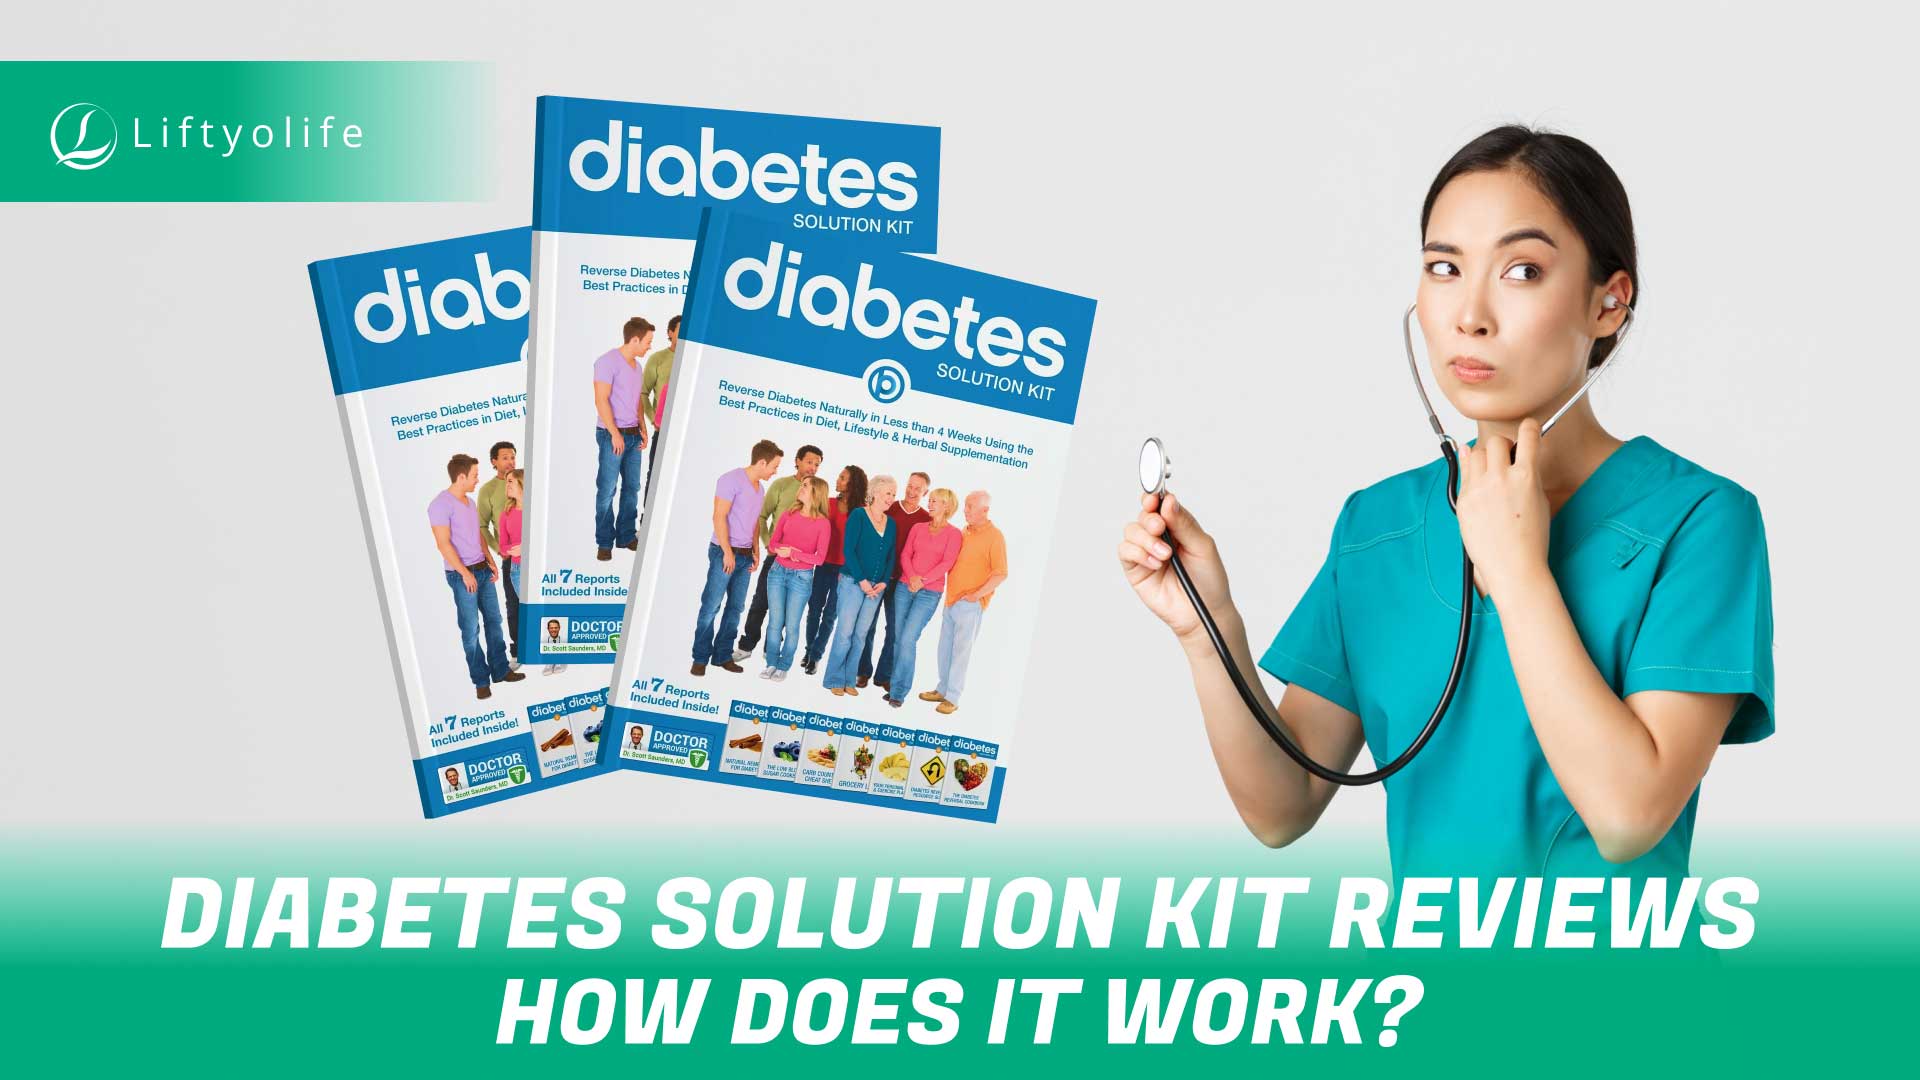 Diabetes Solution Kit Reviews: How Does It Work?